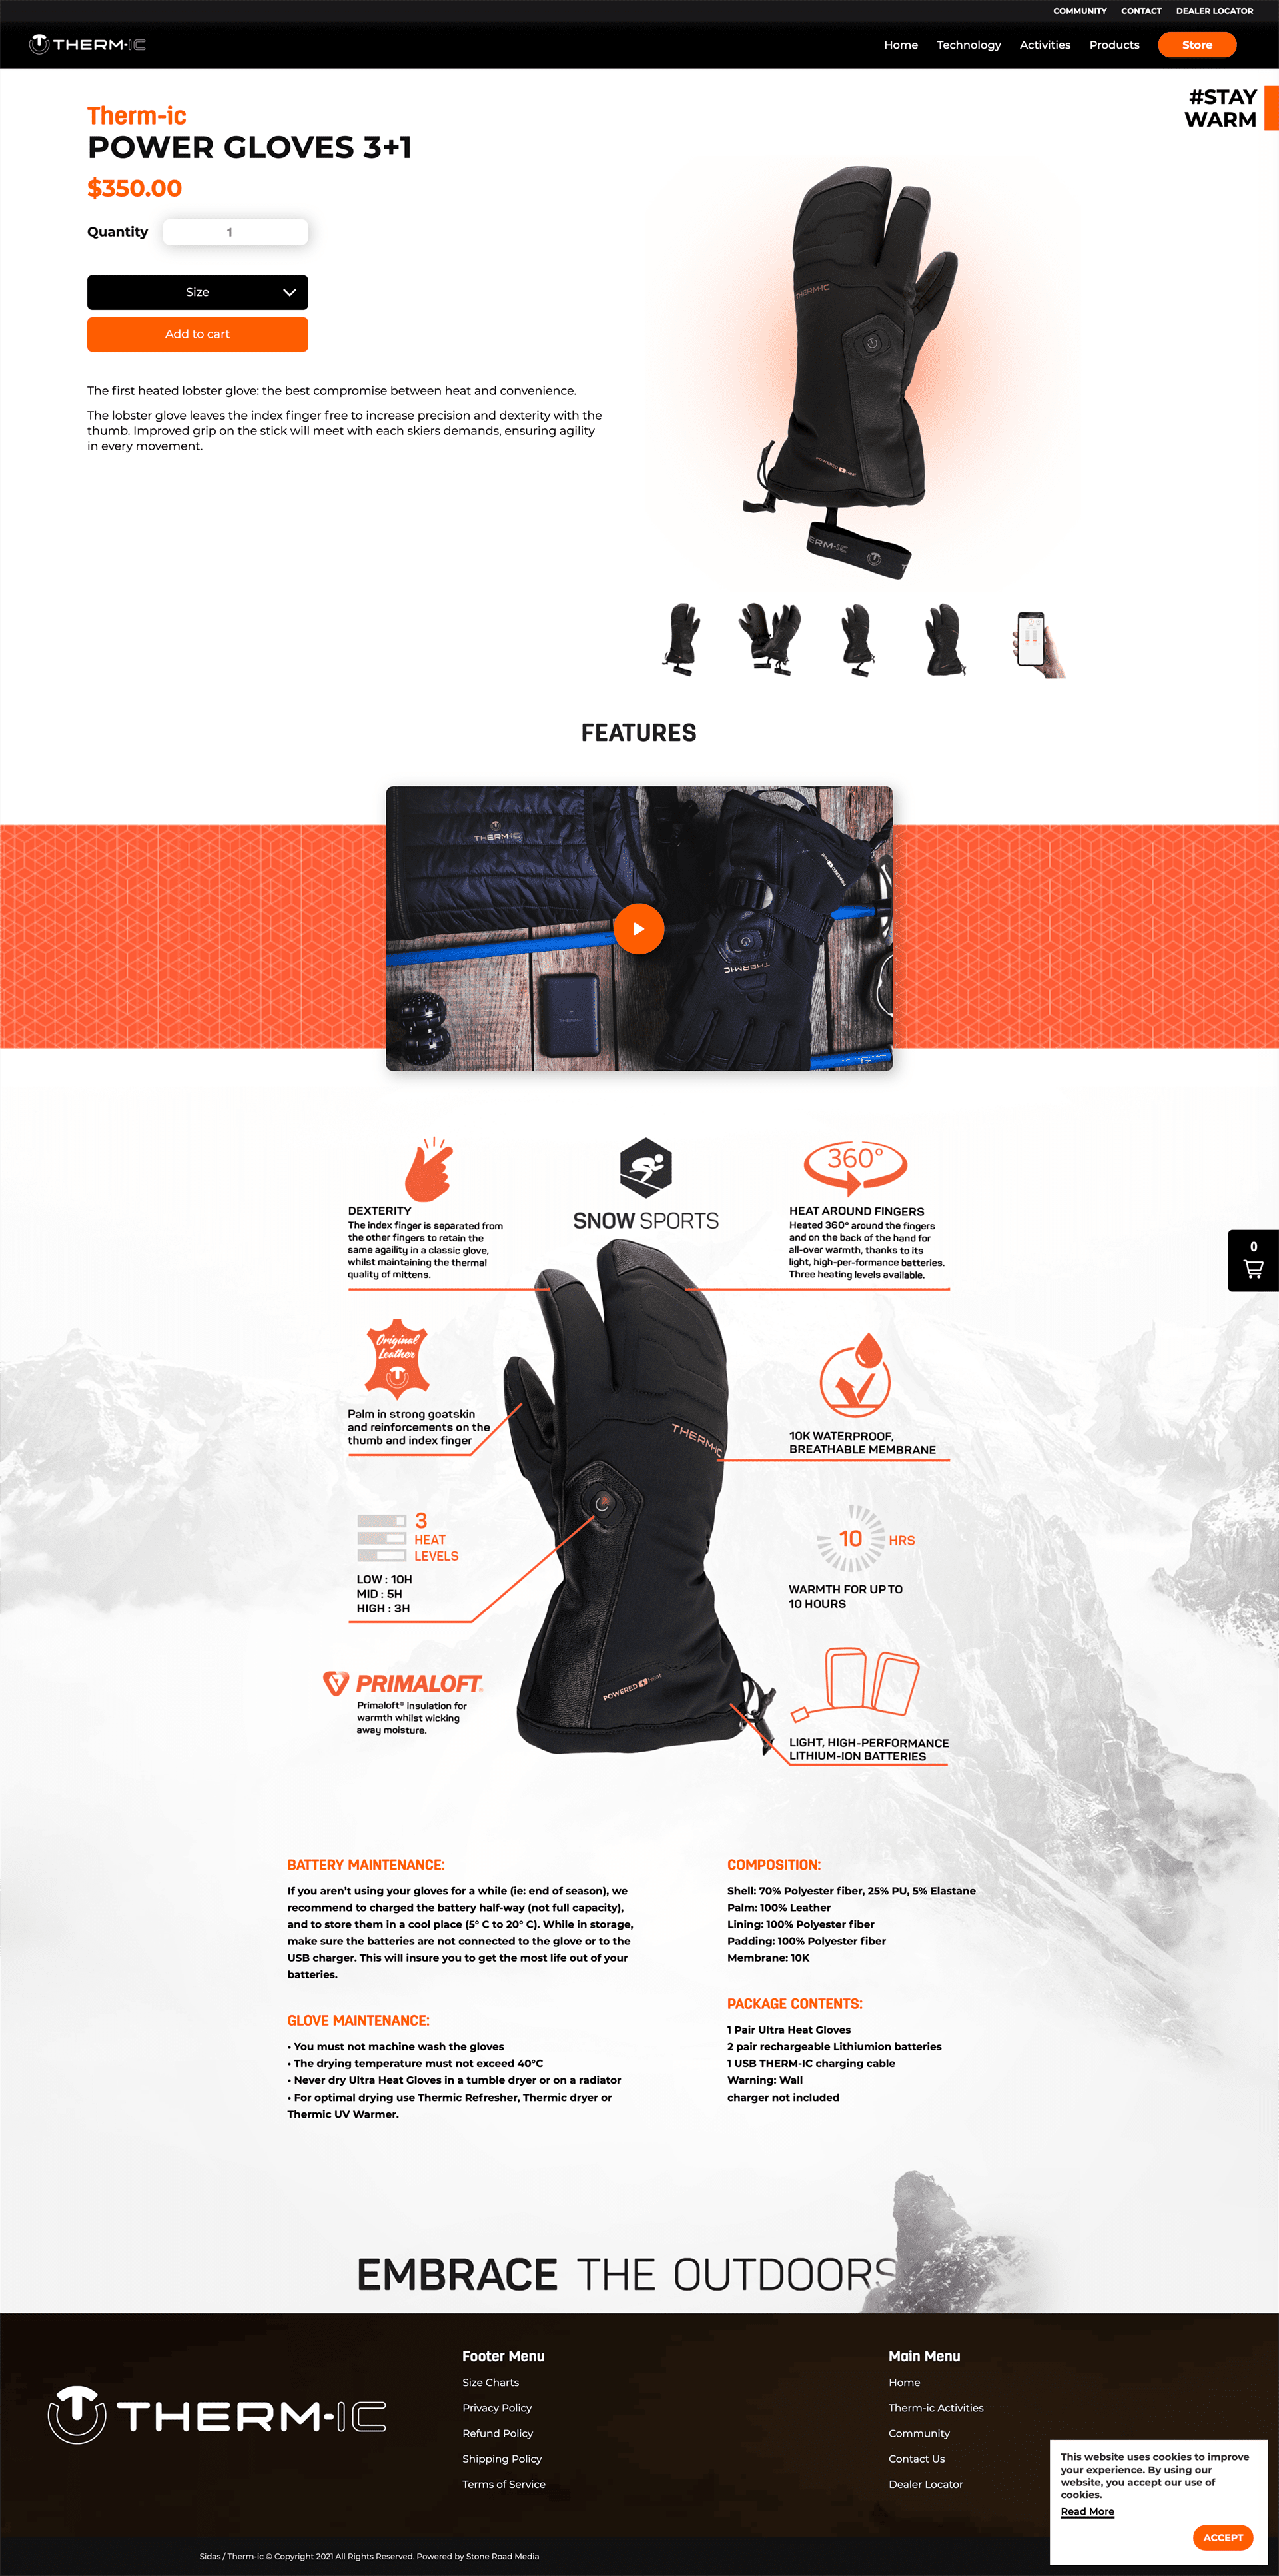 Desktop therm-ic headless shopify product page